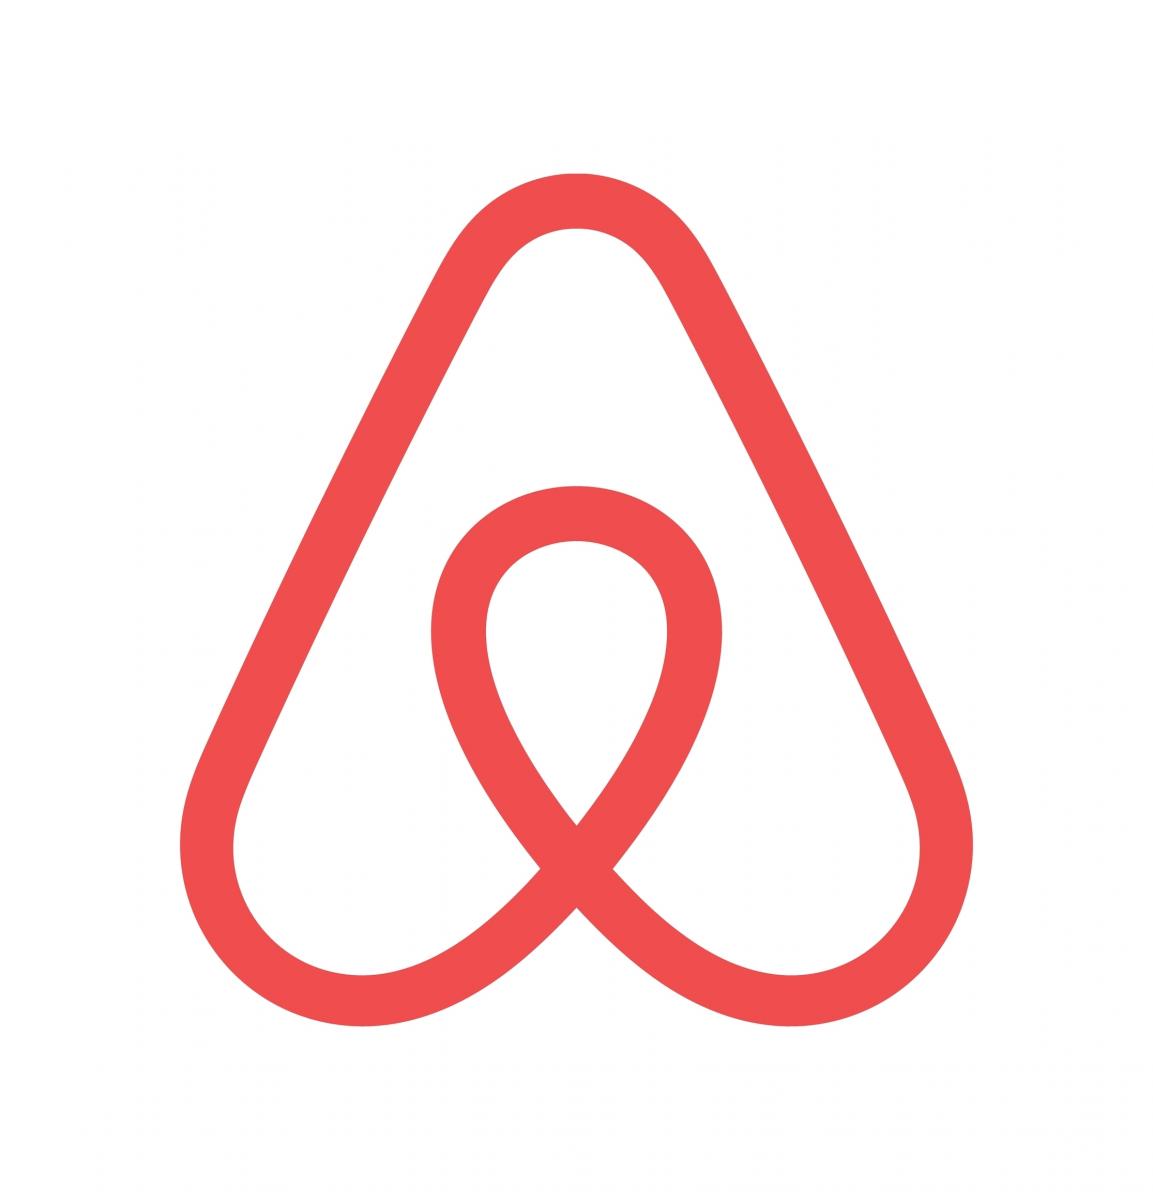 Airbnb reveals income and demographics of landlord hosts